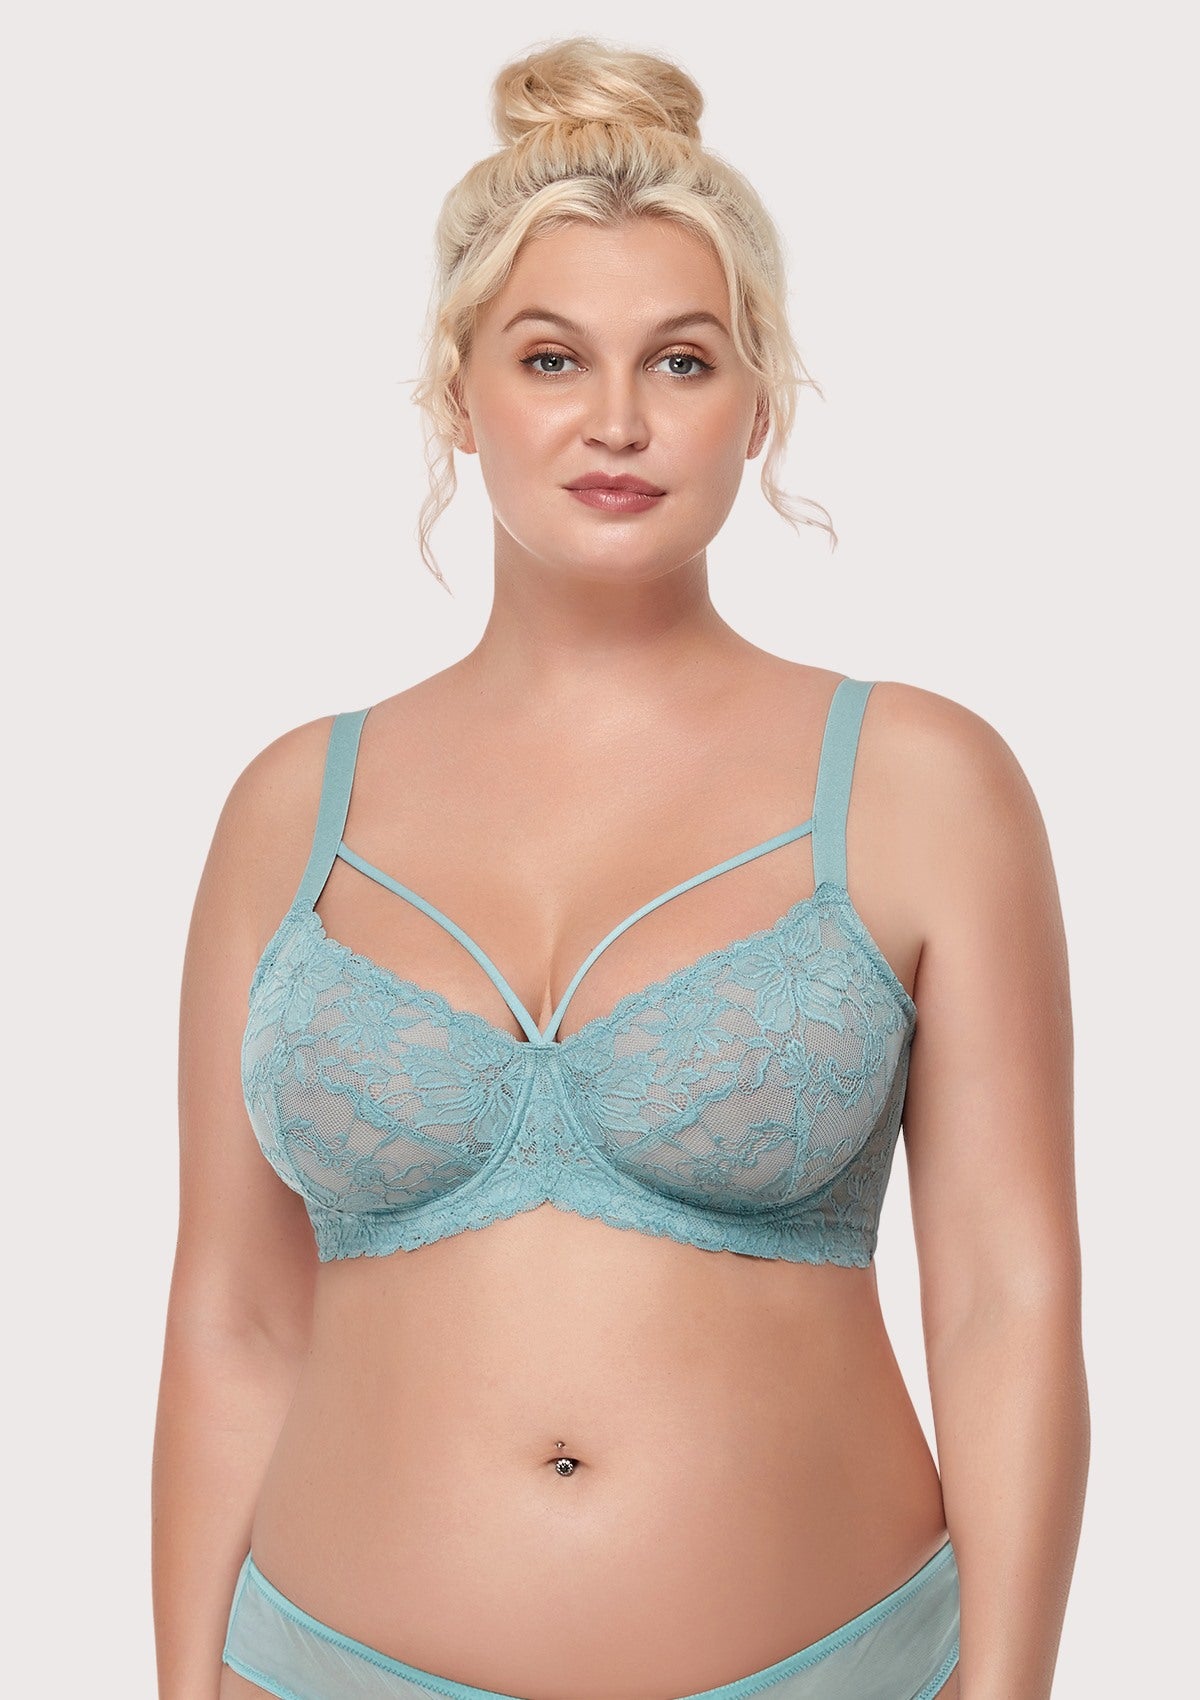 HSIA Pretty In Petals Unlined Lace Bra: Comfortable And Supportive Bra - Crystal Blue / 36 / D